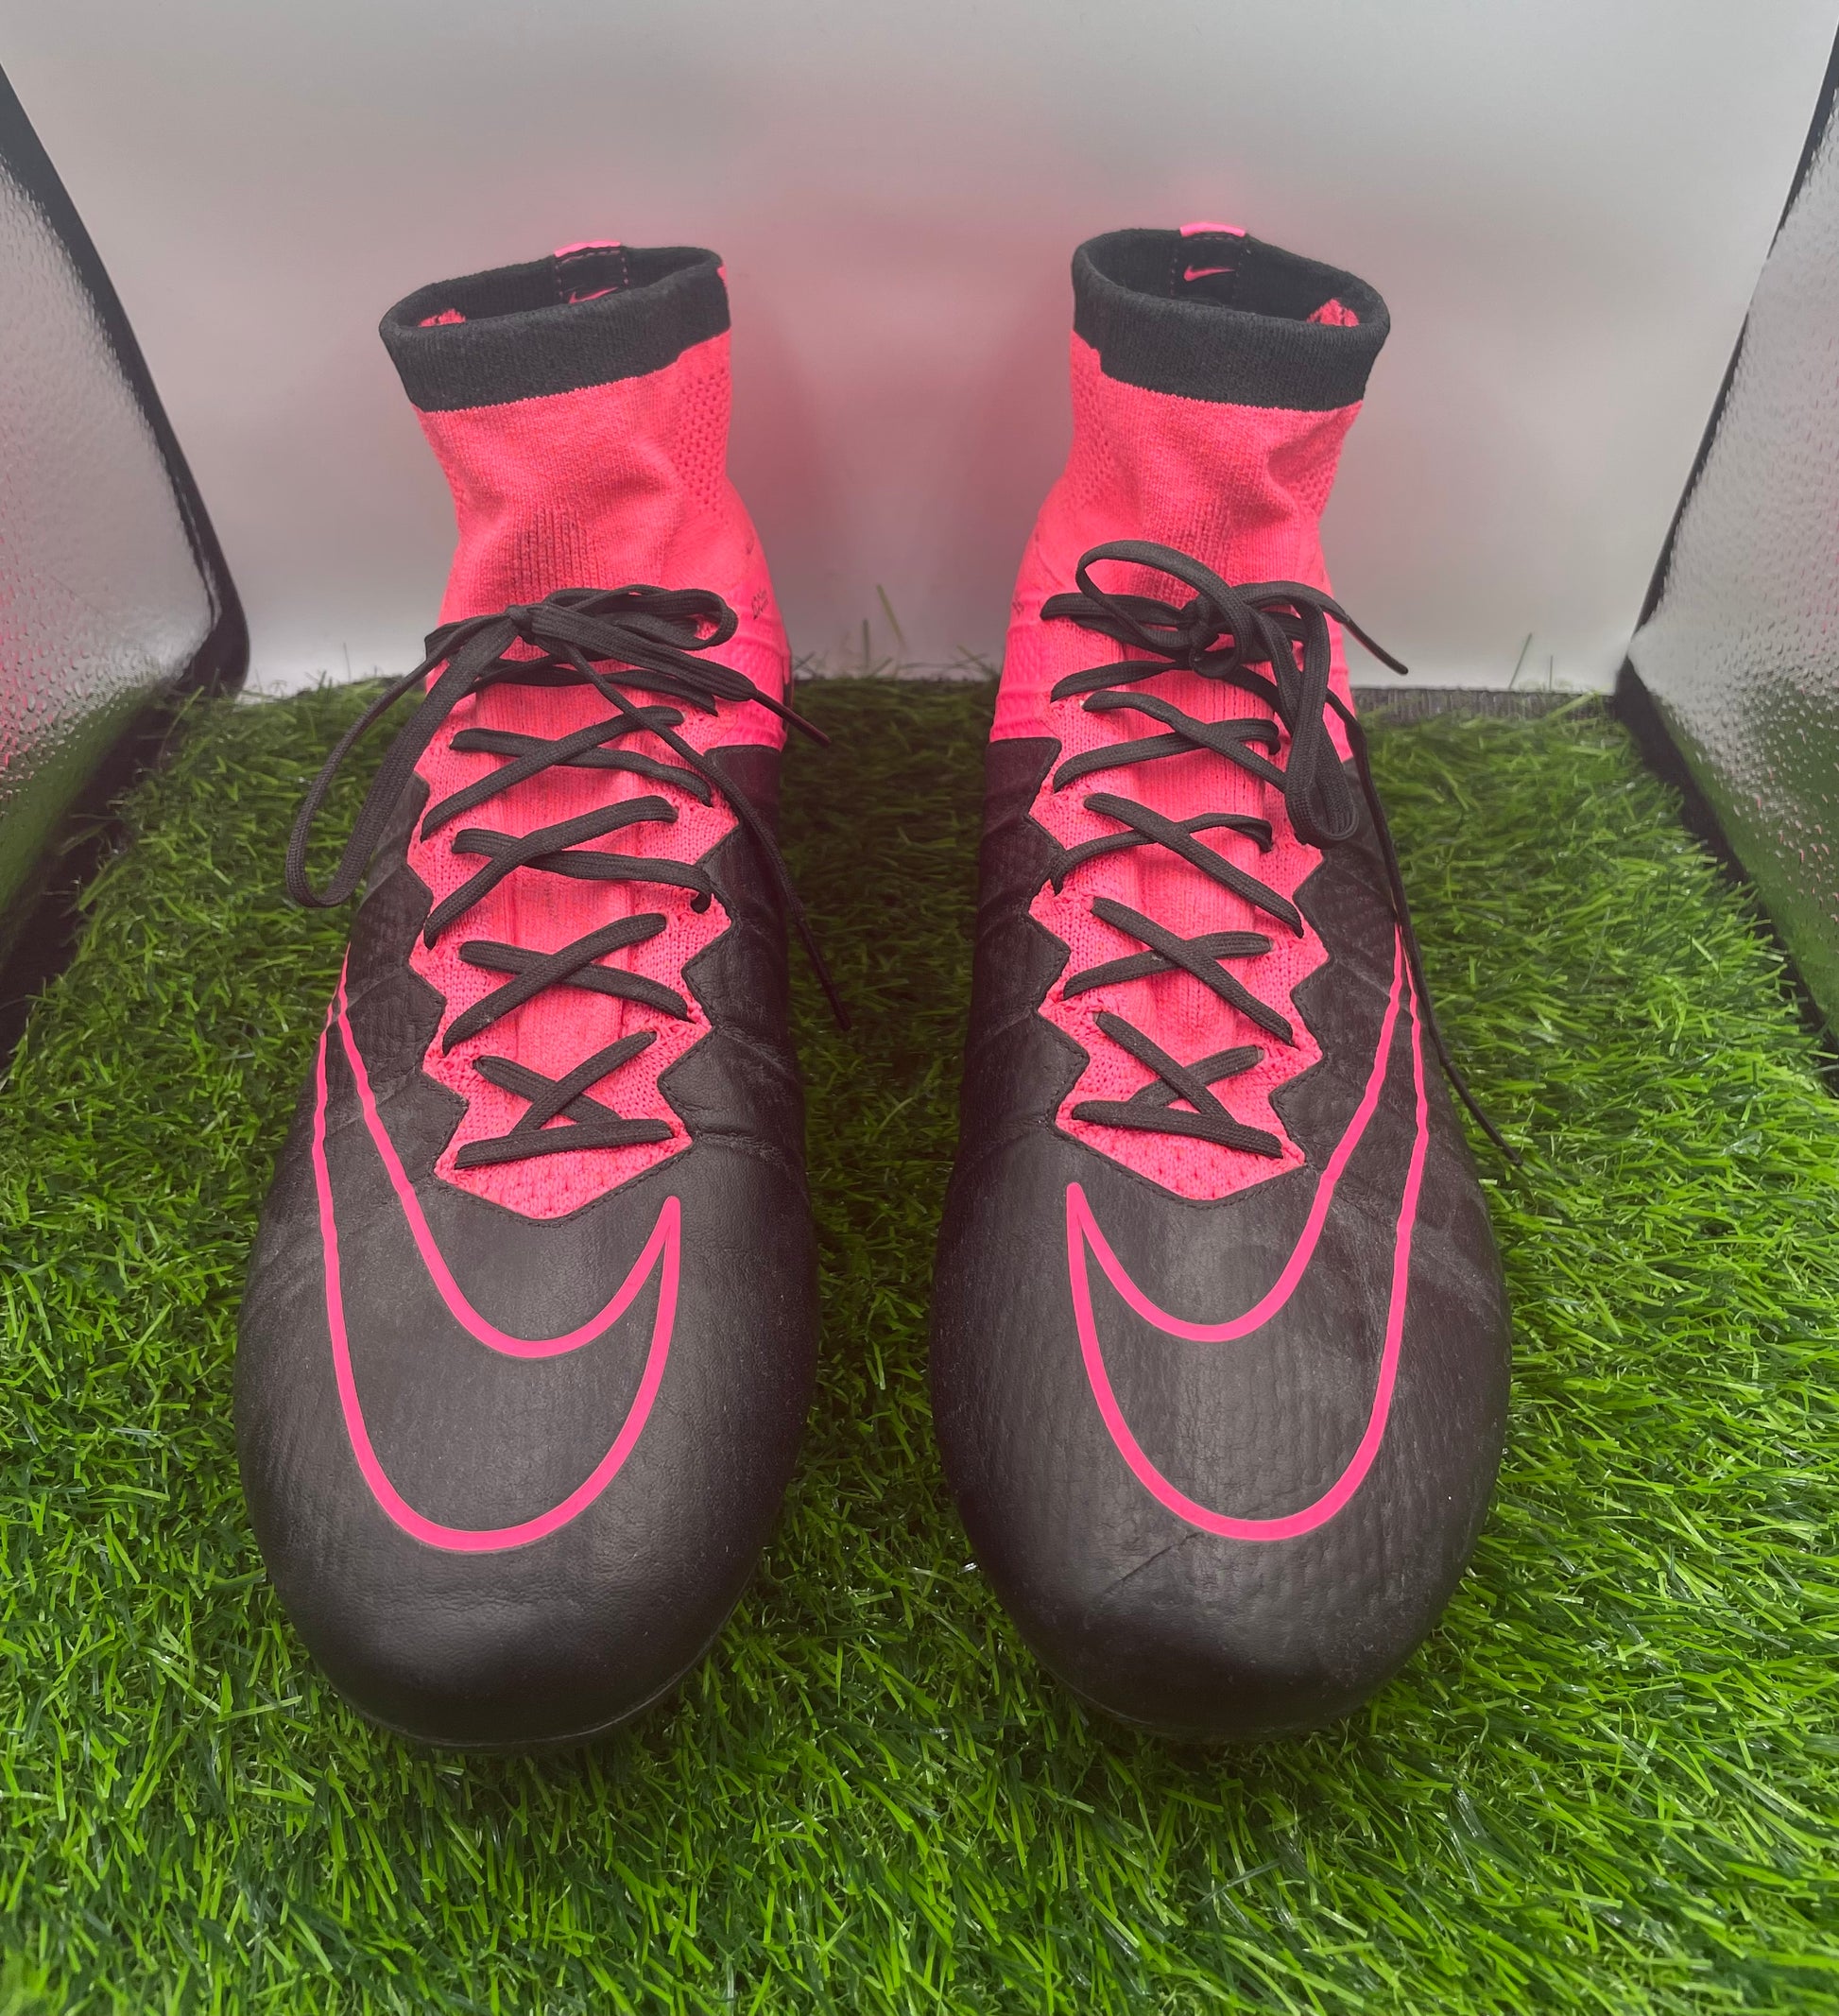 mercurial superfly 3 pink/black SG – boots